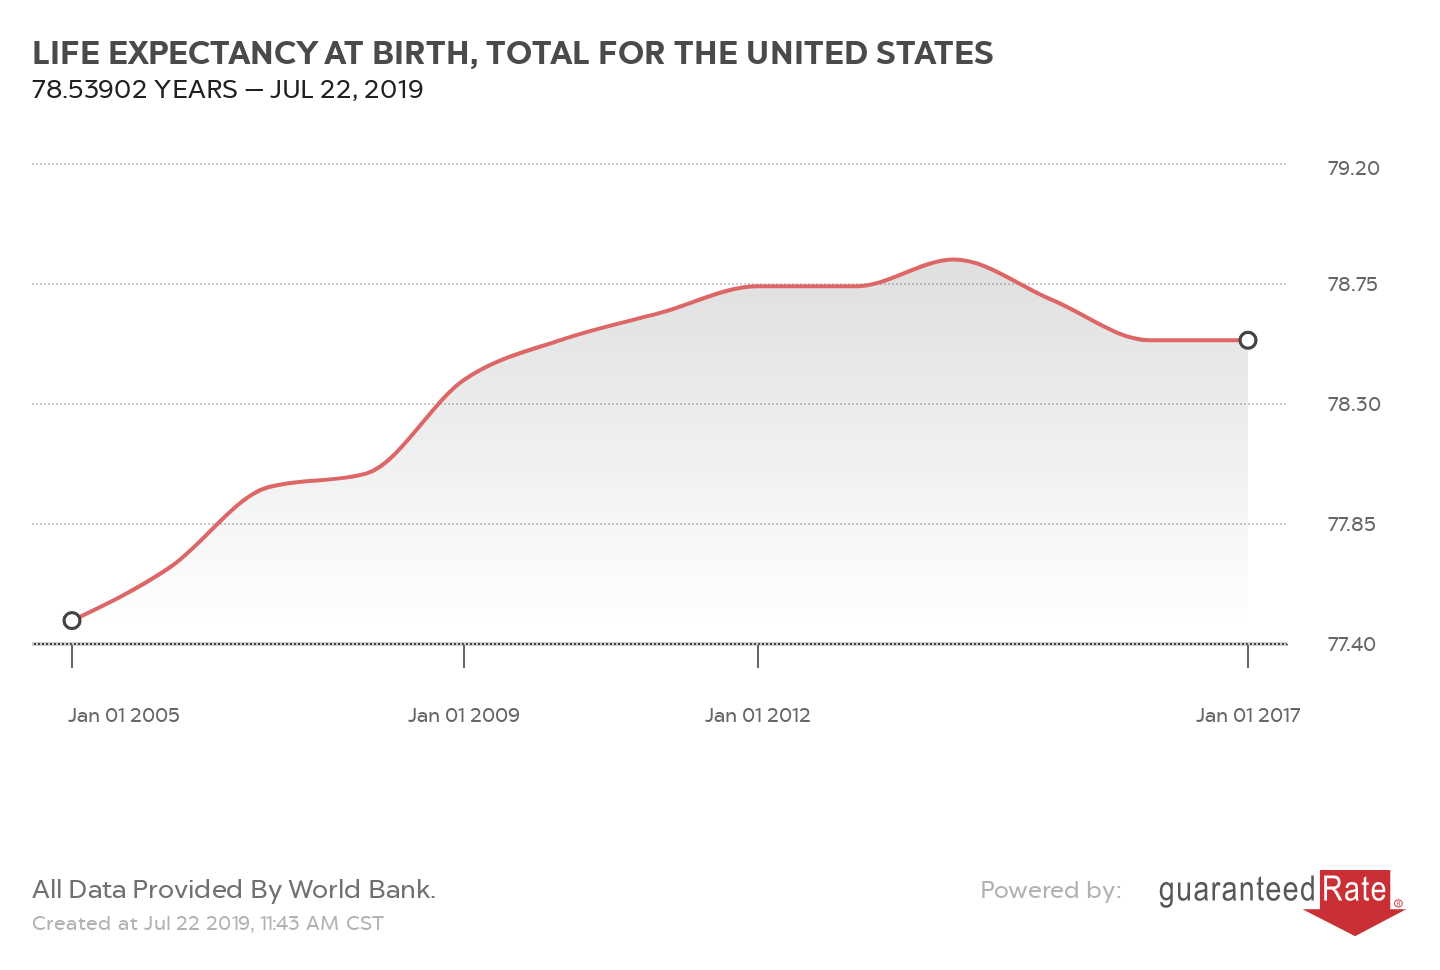 LIFE EXPECTANCY AT BIRTH, TOTAL FOR THE UNITED STATES